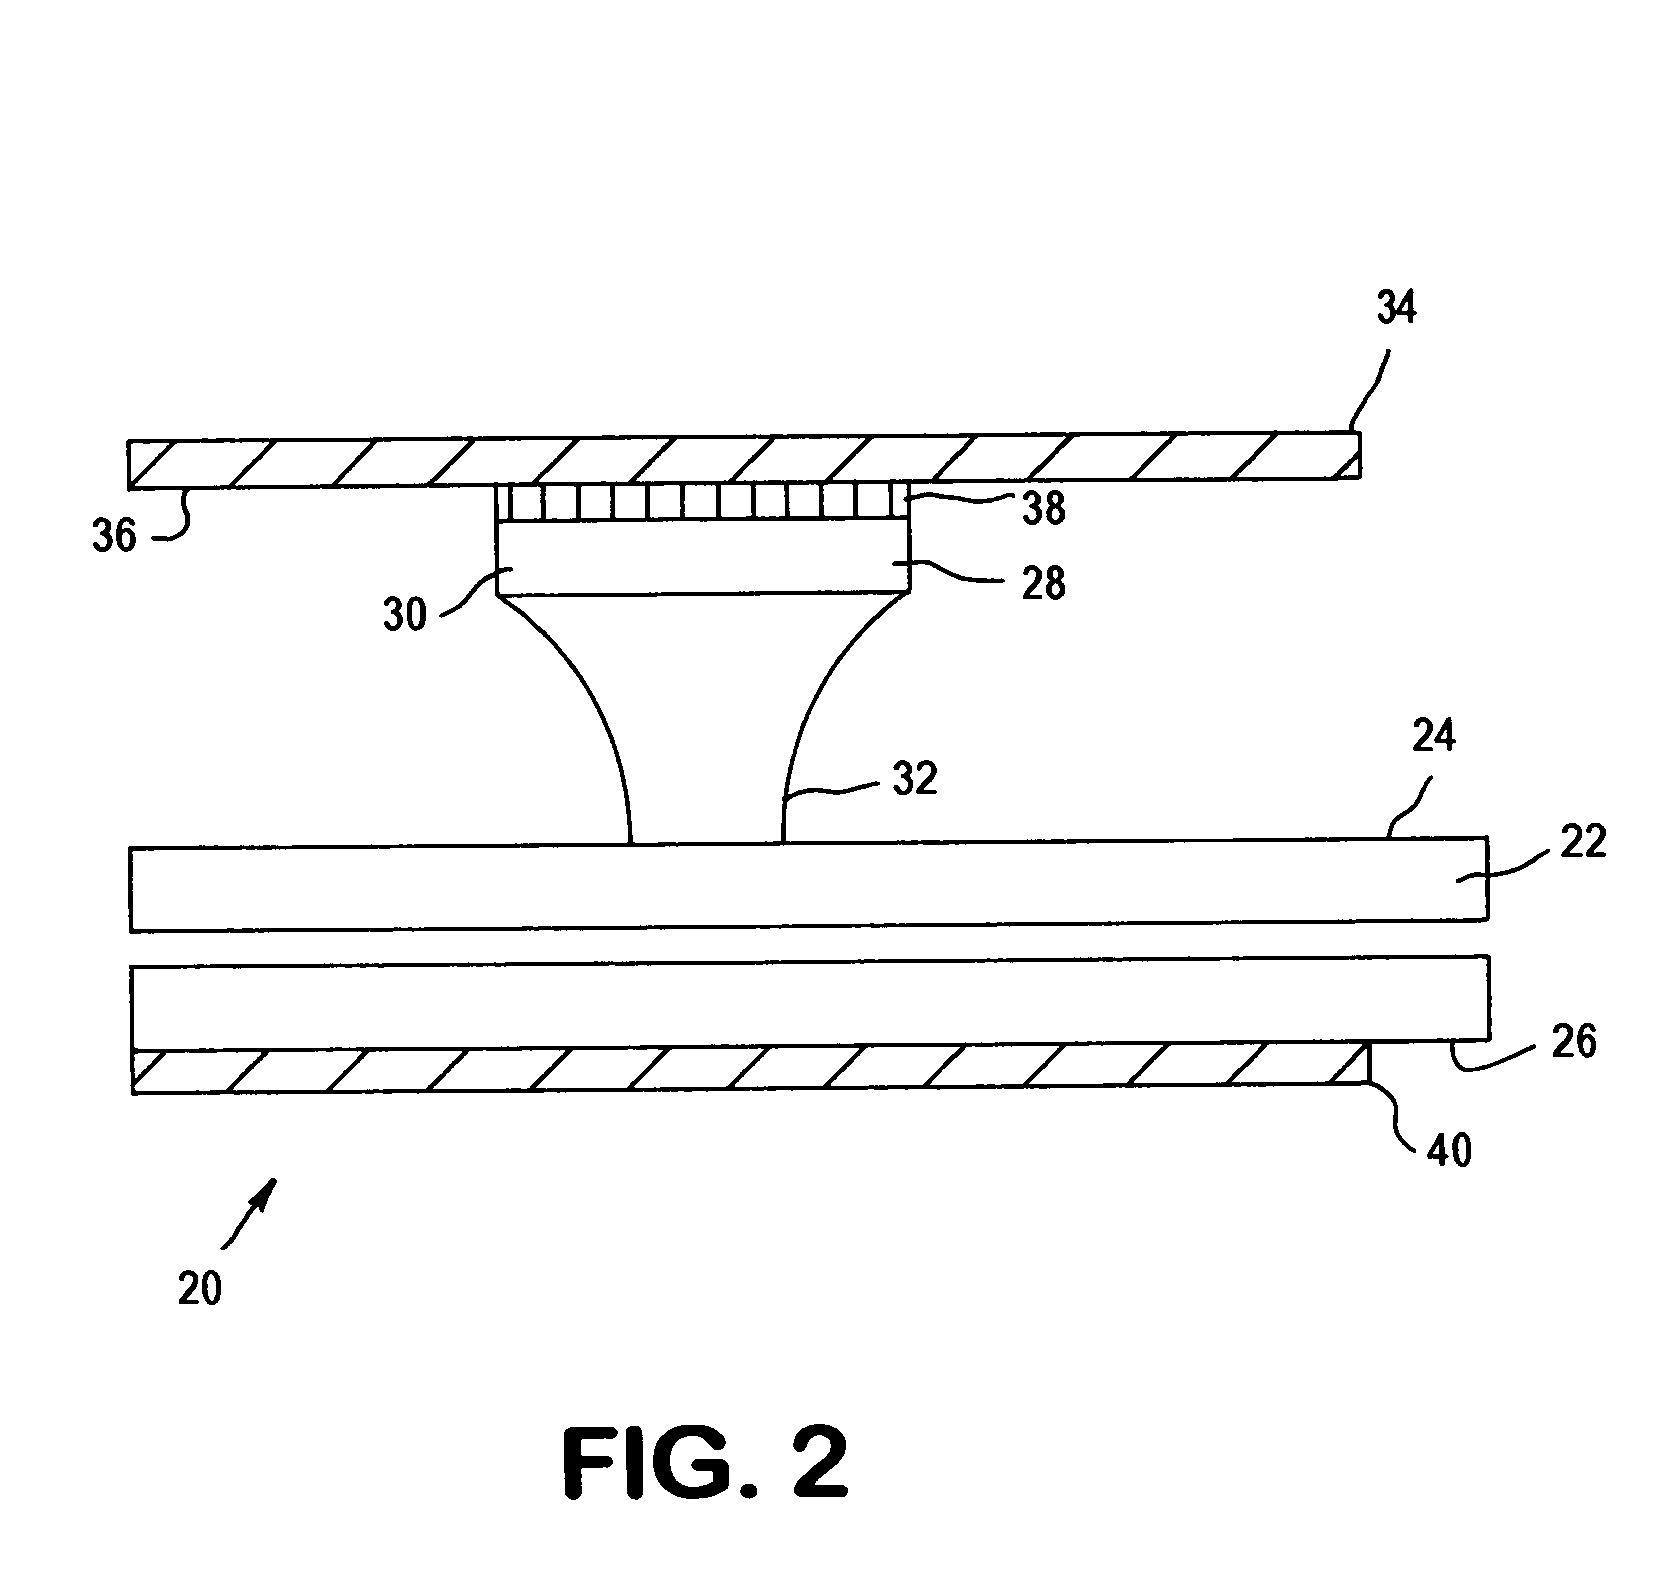 Apparatus and method for analyzing a liquid in a capillary tube of a hematology instrument